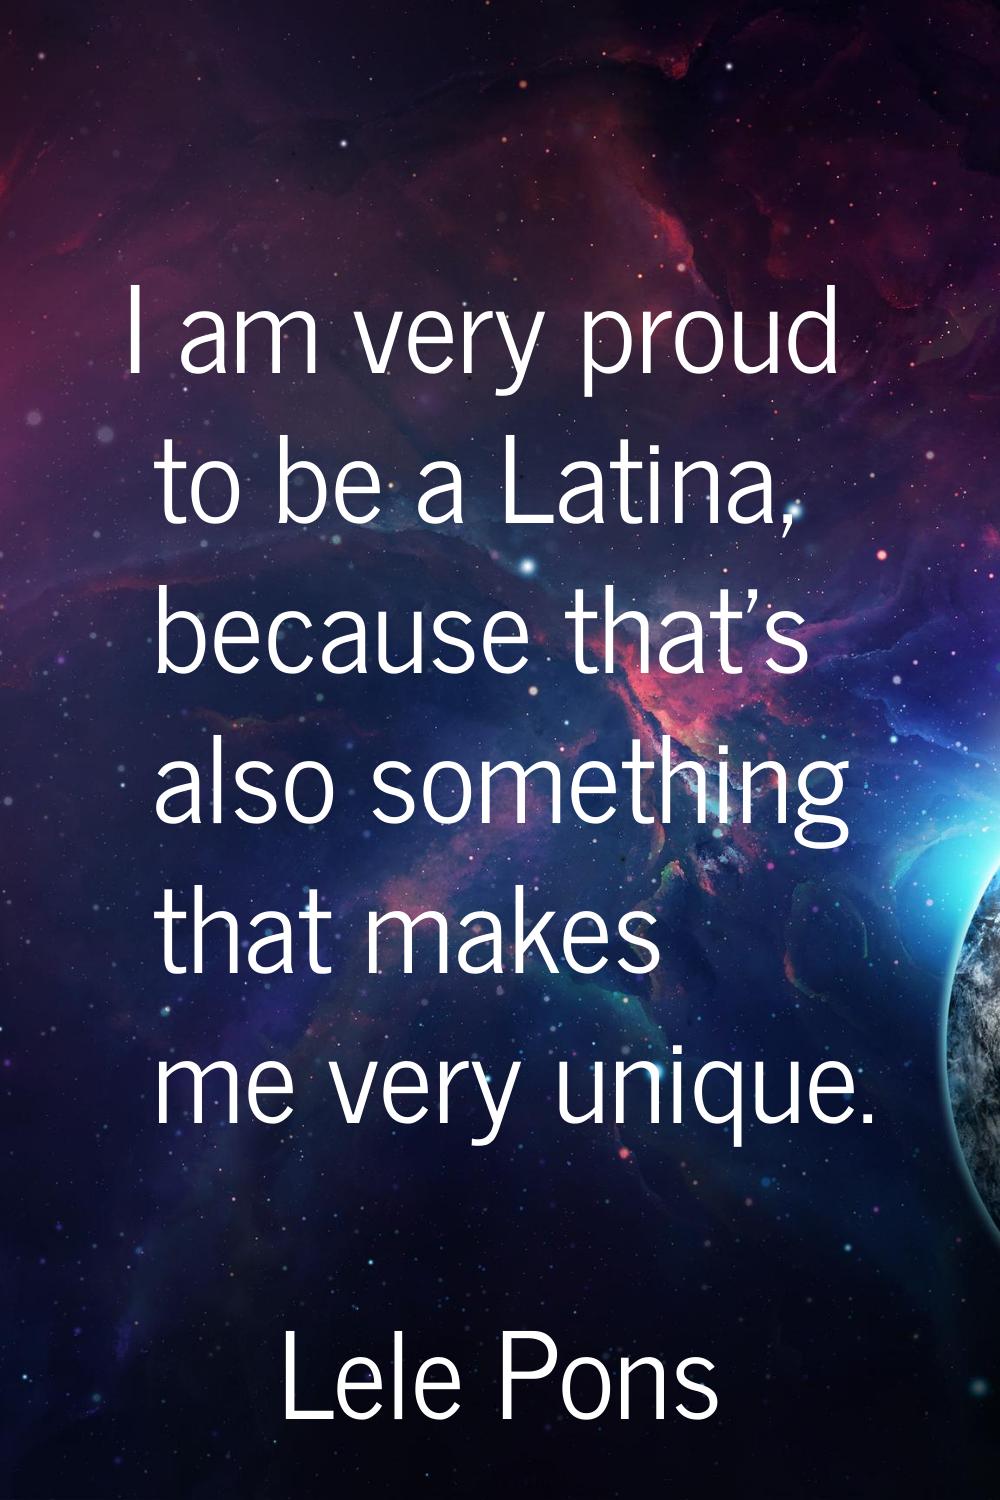 I am very proud to be a Latina, because that's also something that makes me very unique.